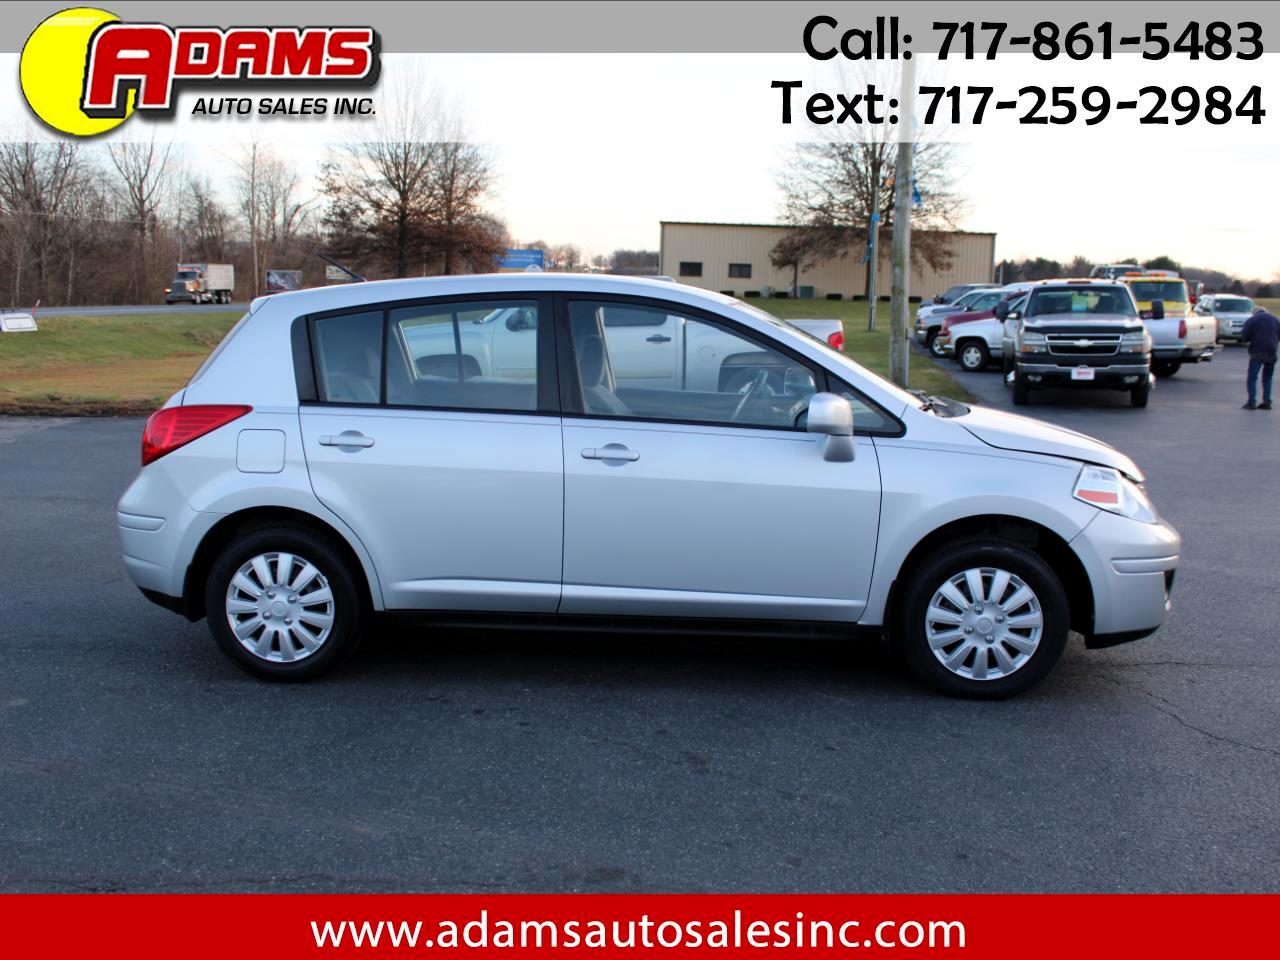 Used 2008 Nissan Versa 5dr Hb I4 Man 1 8 S For Sale In